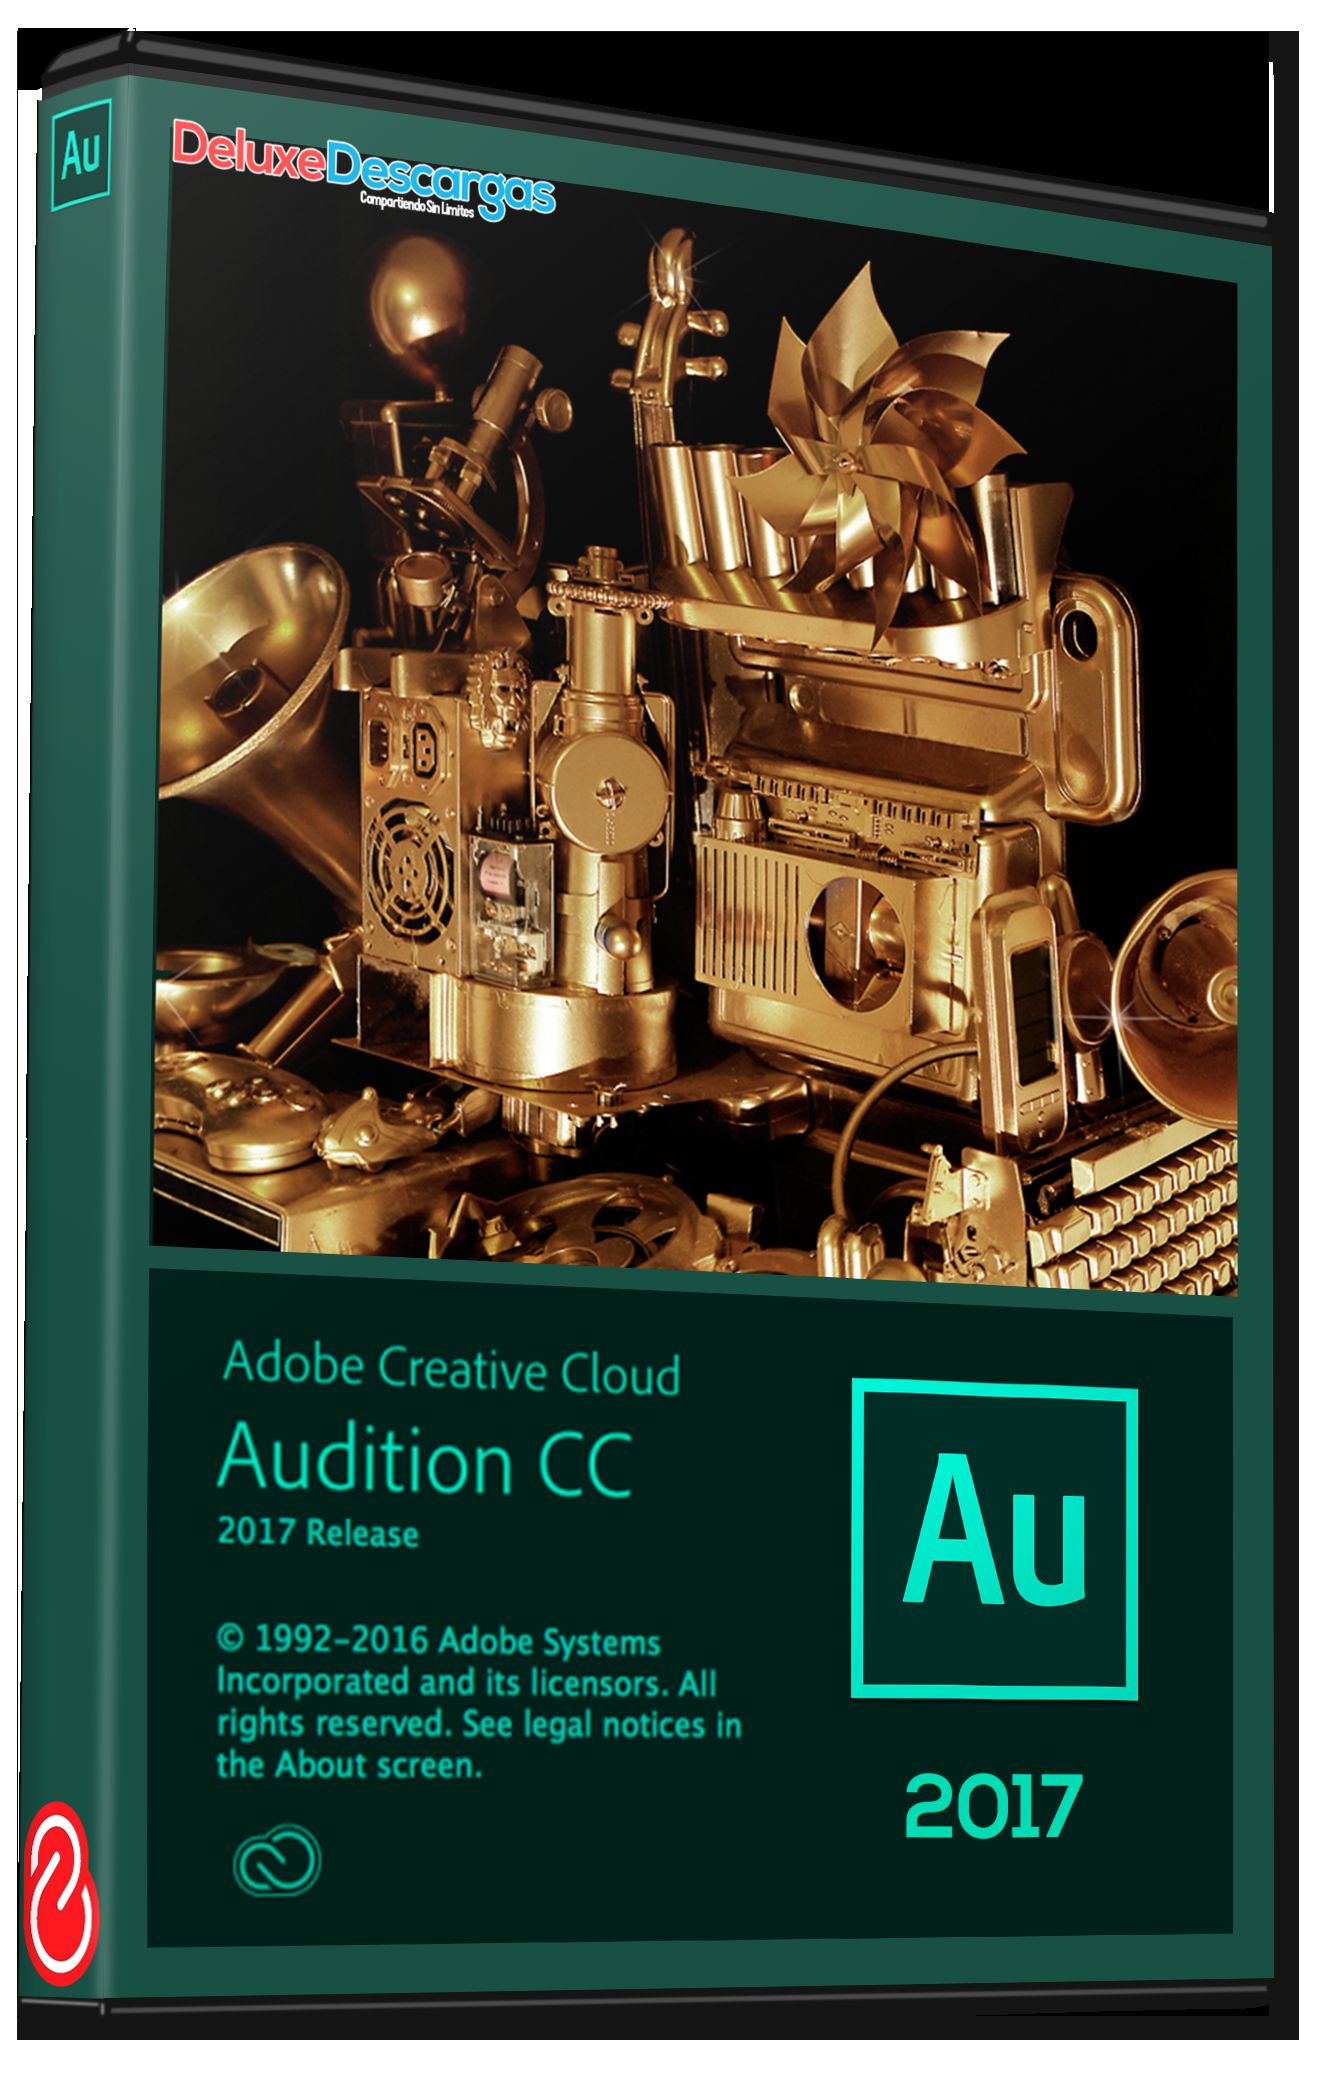 Adobe audition cc 2018 for macs